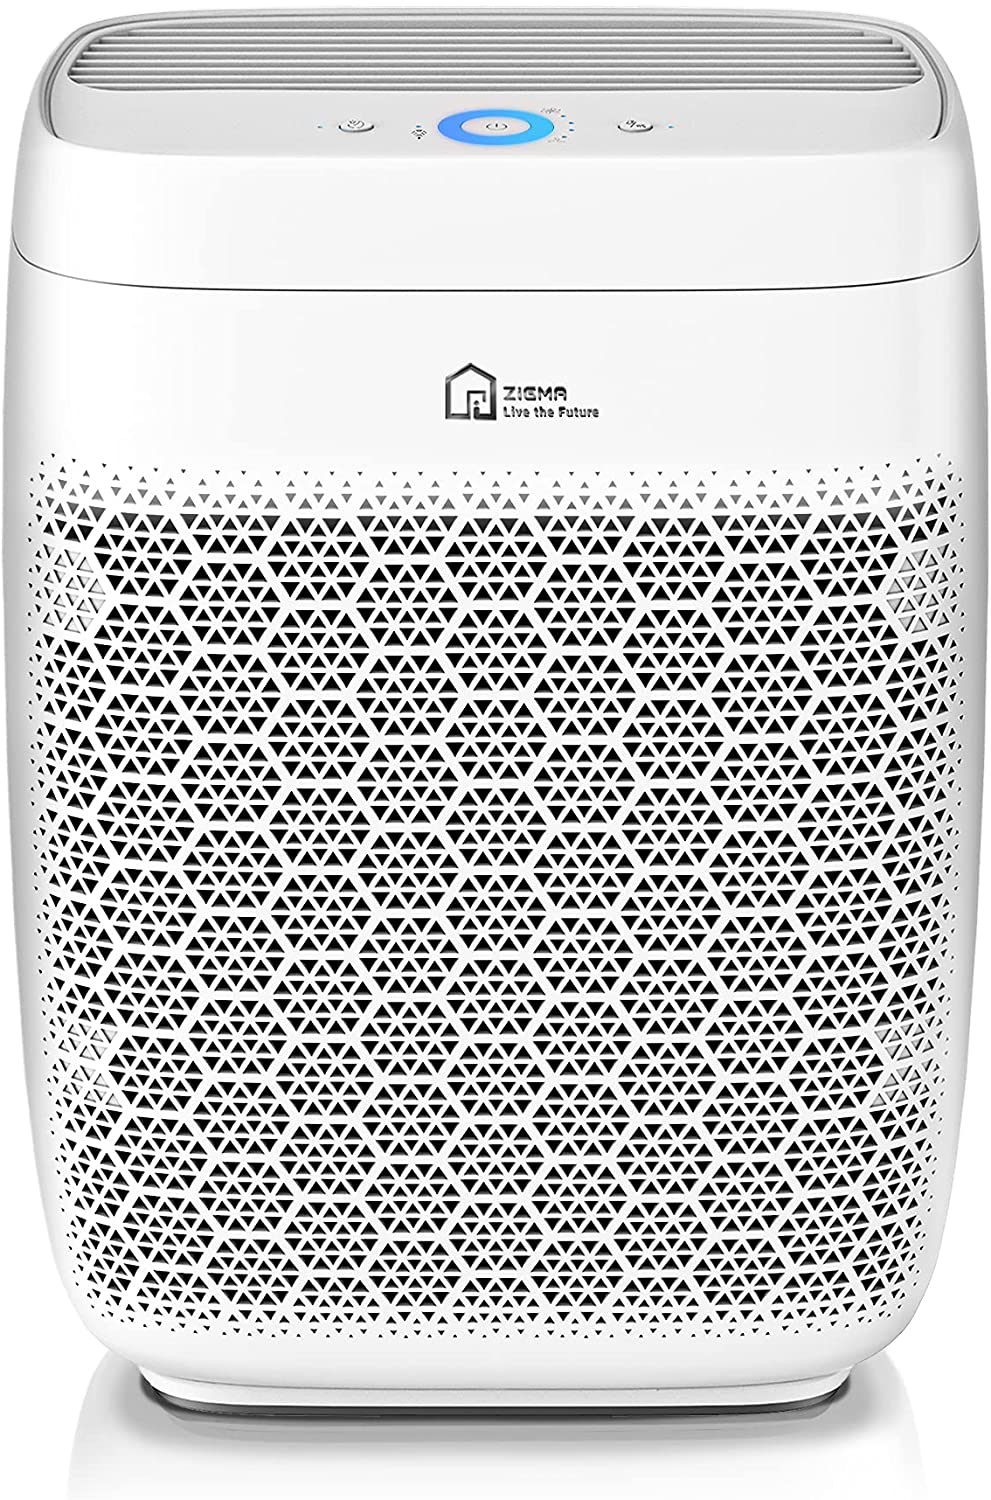 You can control the new Zigma Aerio 300 Wi-Fi Air Purifier with the Siri voice assistant.